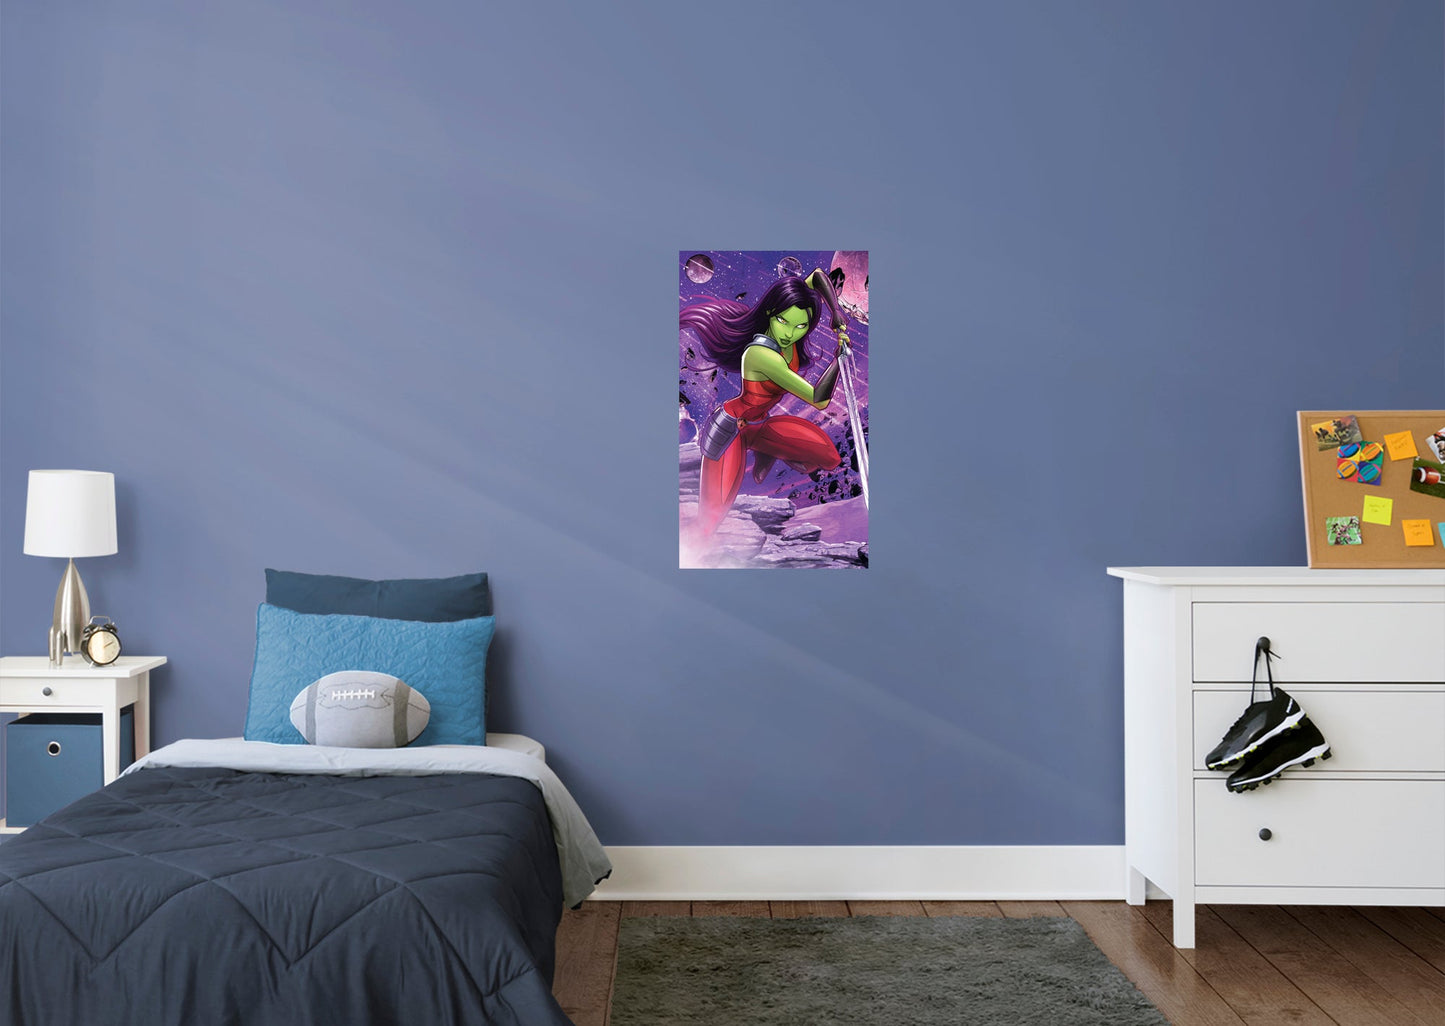 Guardians of the Galaxy: Gamora Mural        - Officially Licensed Marvel Removable Wall   Adhesive Decal